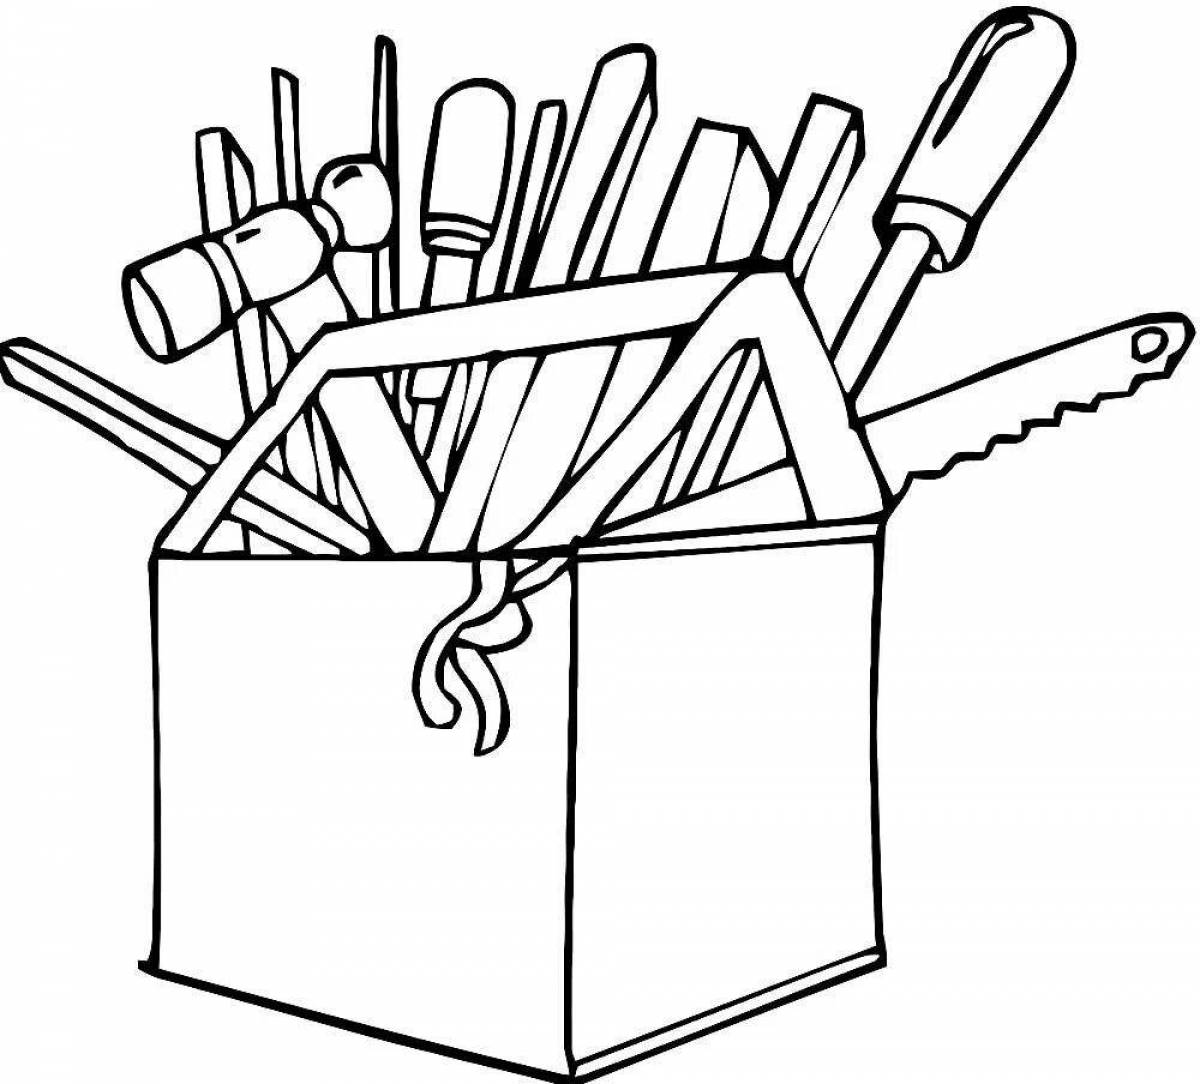 Playful toolbox coloring page